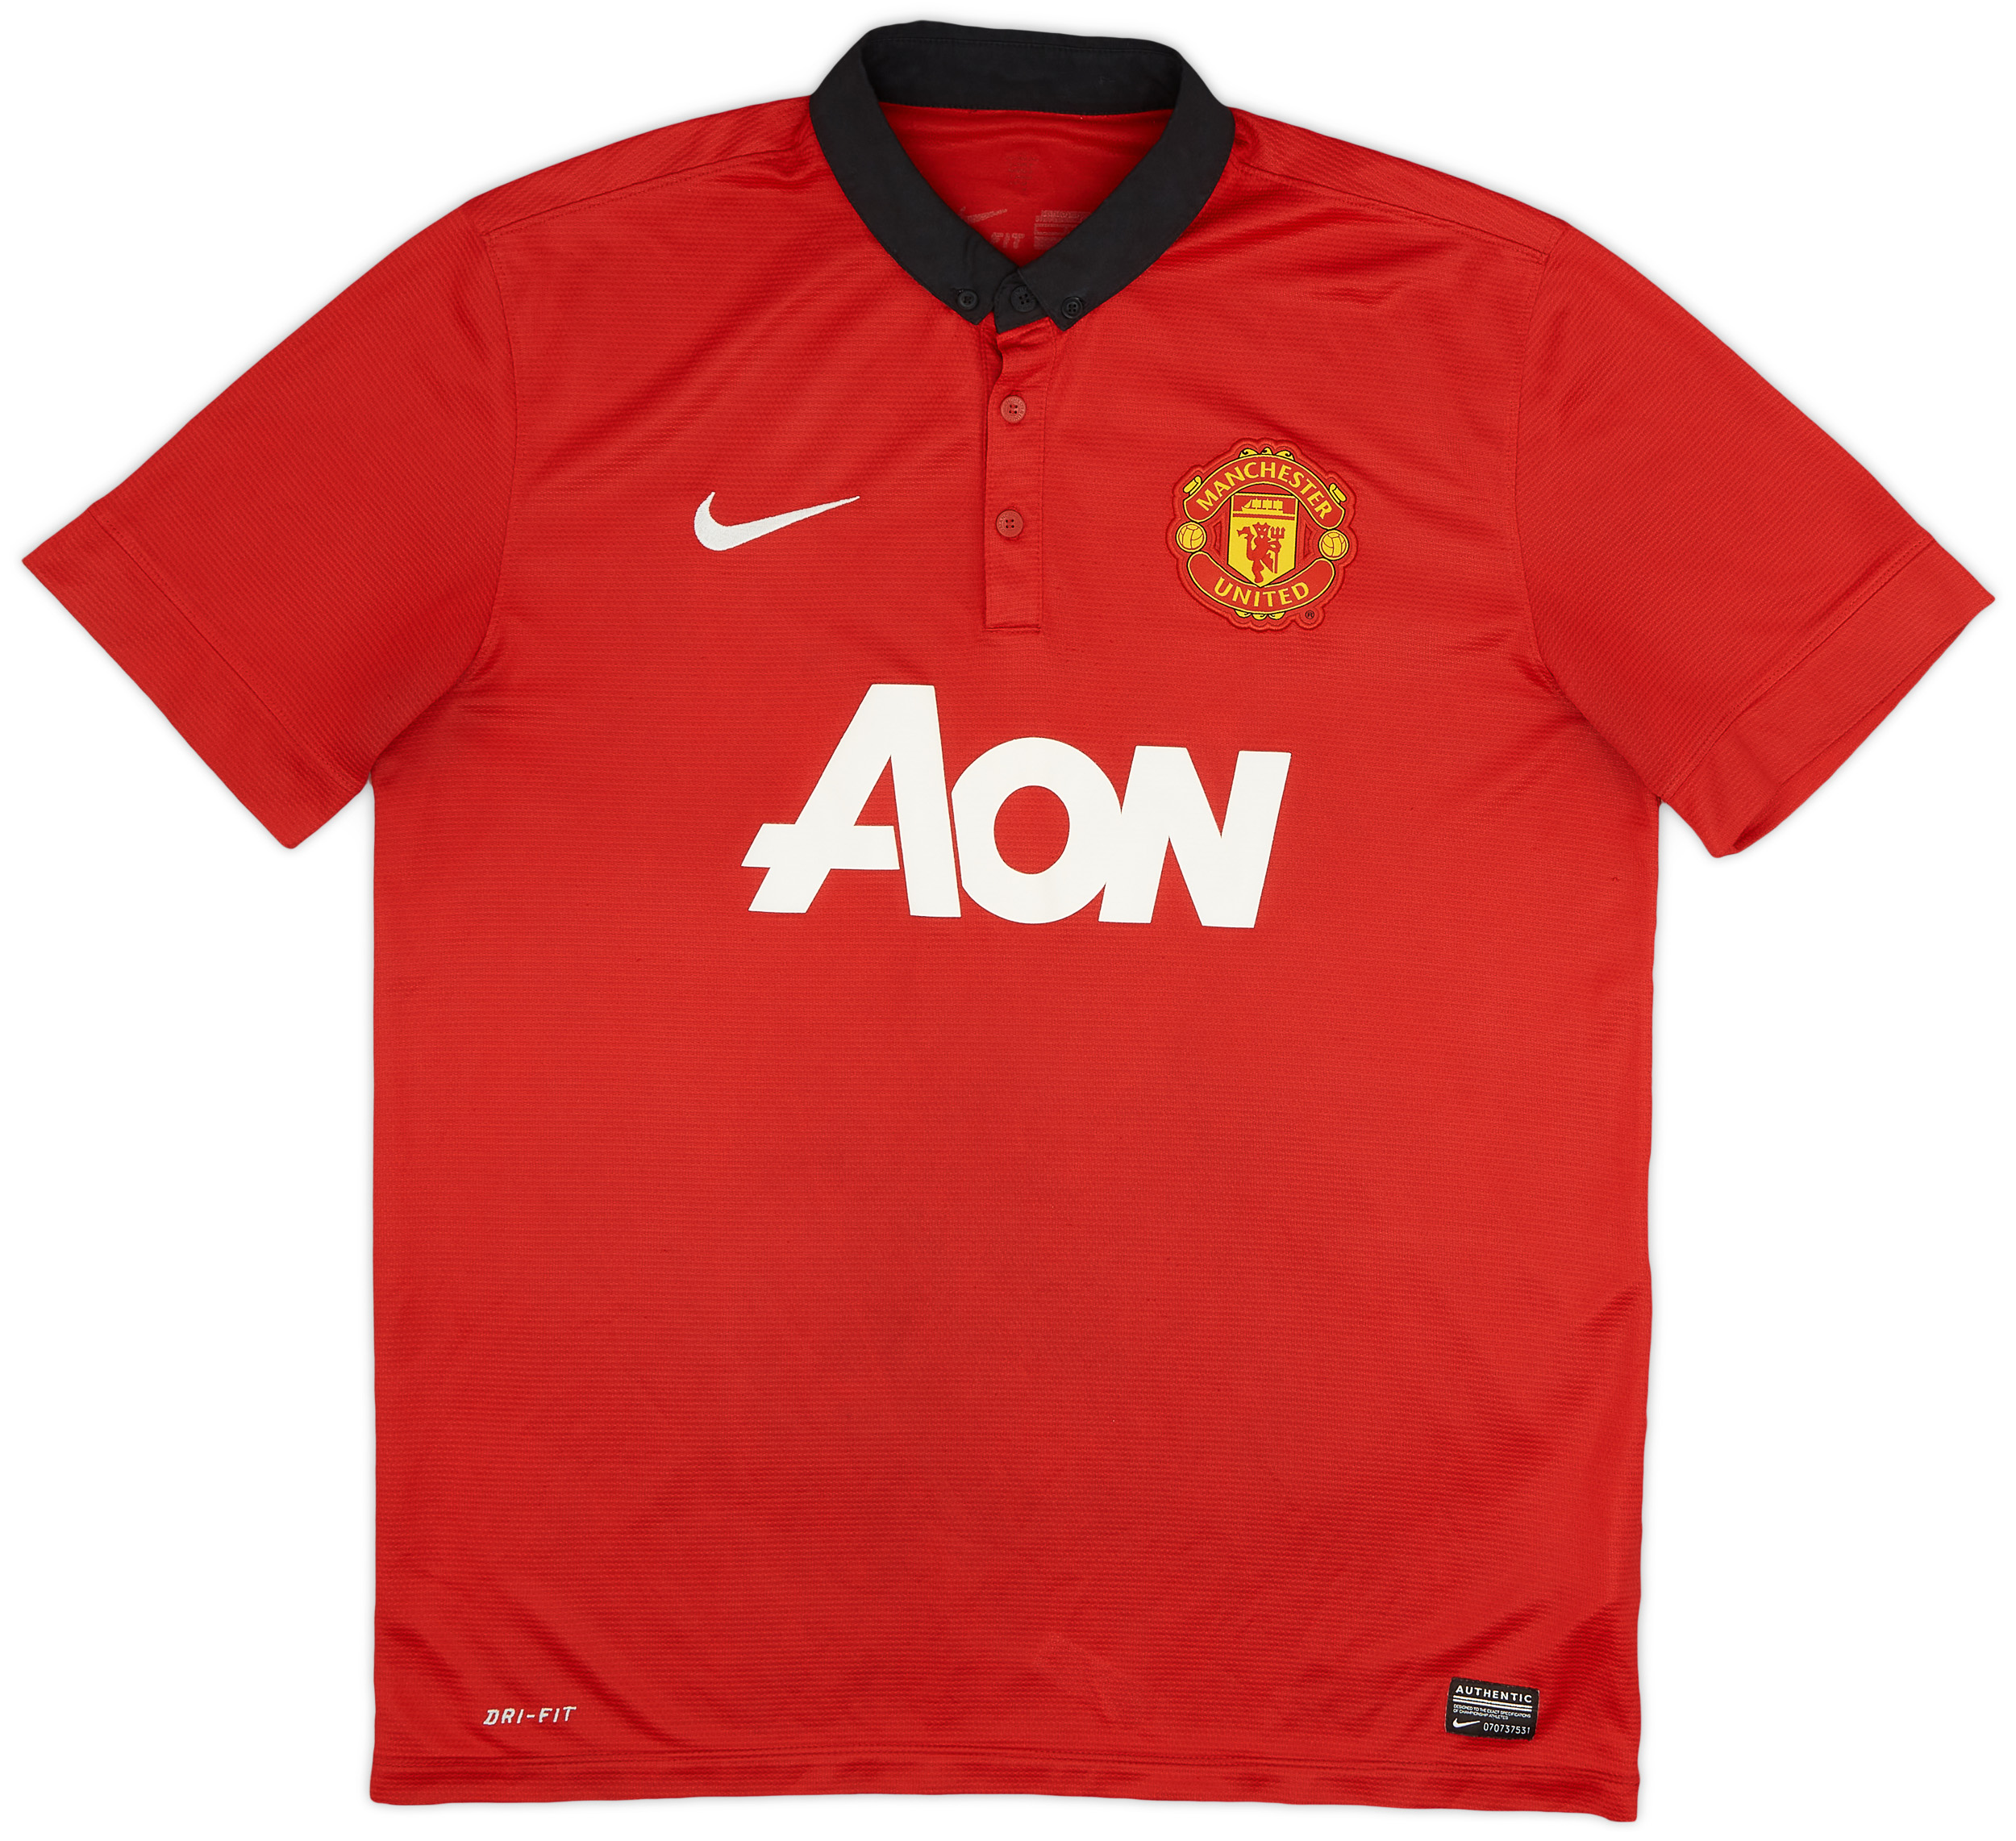 2013-14 Manchester United Home Shirt - 9/10 - ()